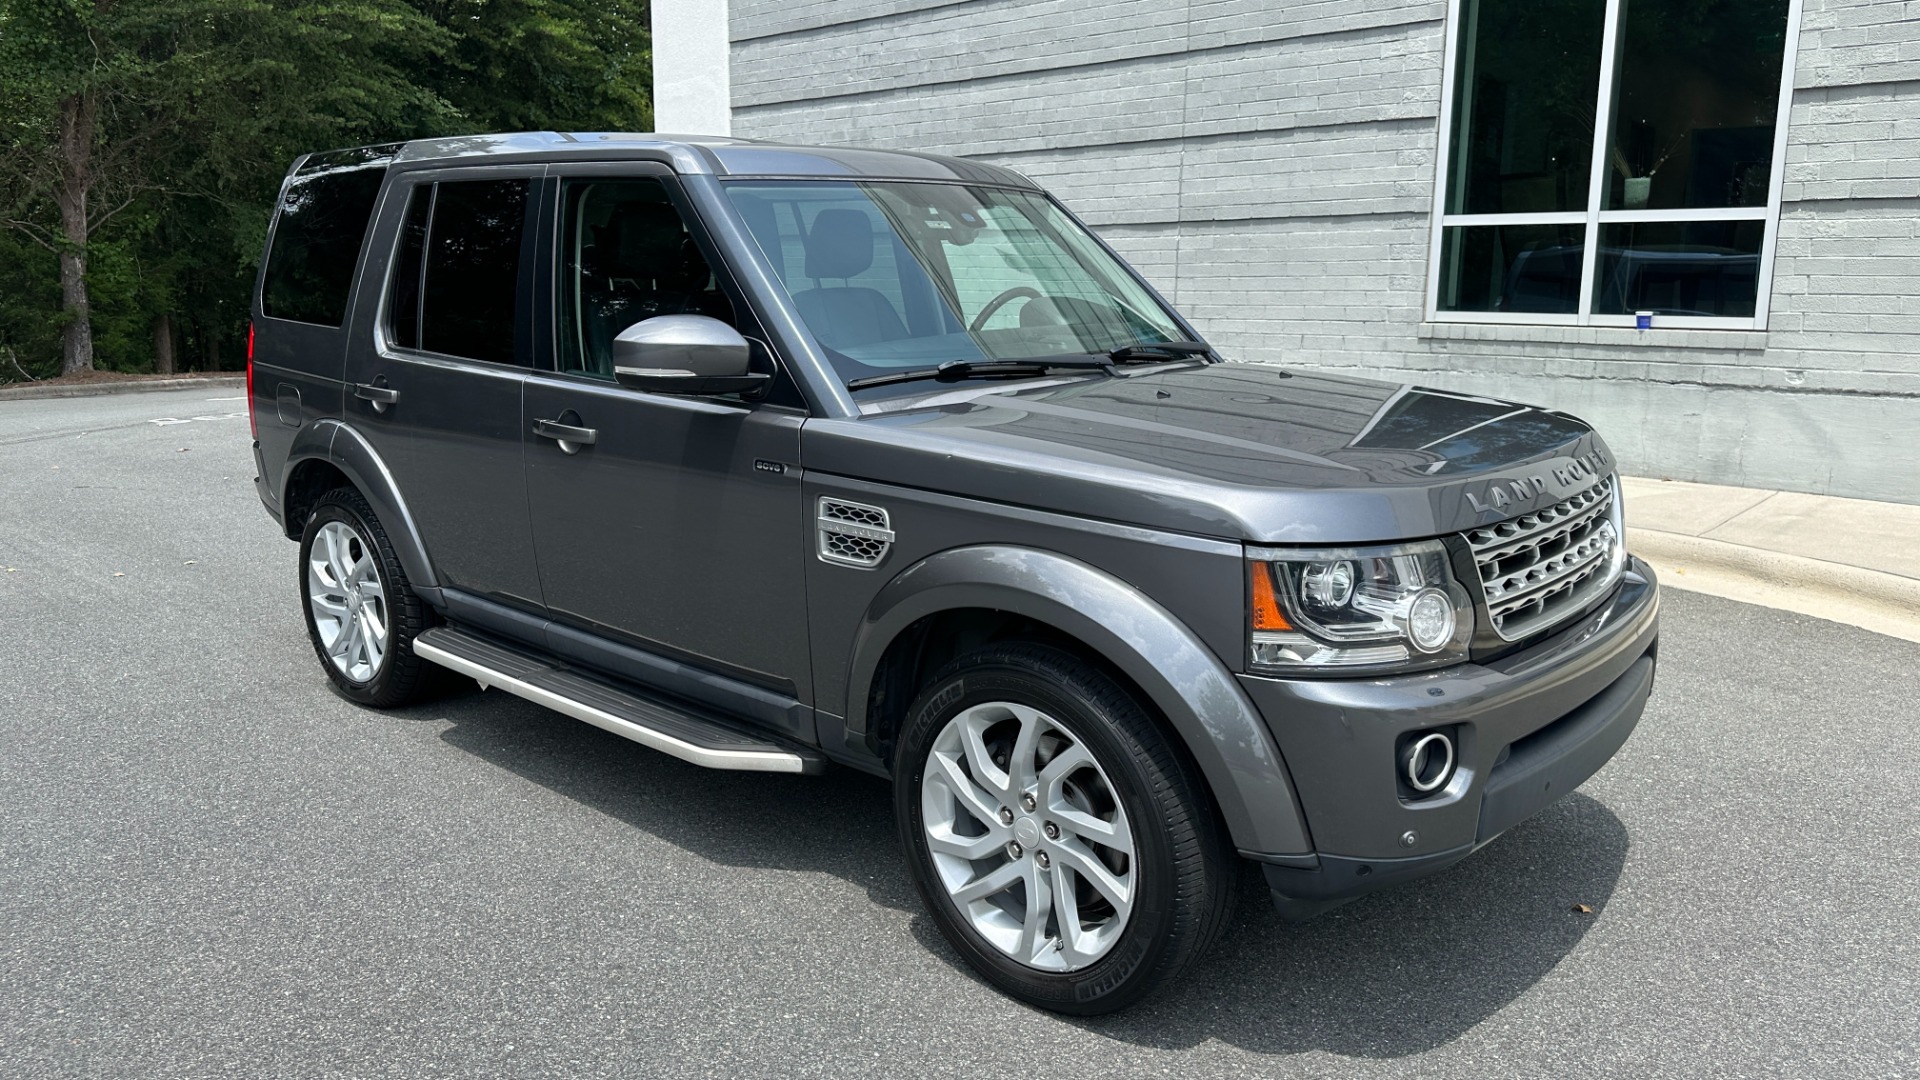 Used 2015 Land Rover LR4 LUX / VISION ASSIST / 20IN WHEELS / GLOSS BLACK TRIM / 3 ROW SEATING for sale $22,500 at Formula Imports in Charlotte NC 28227 5